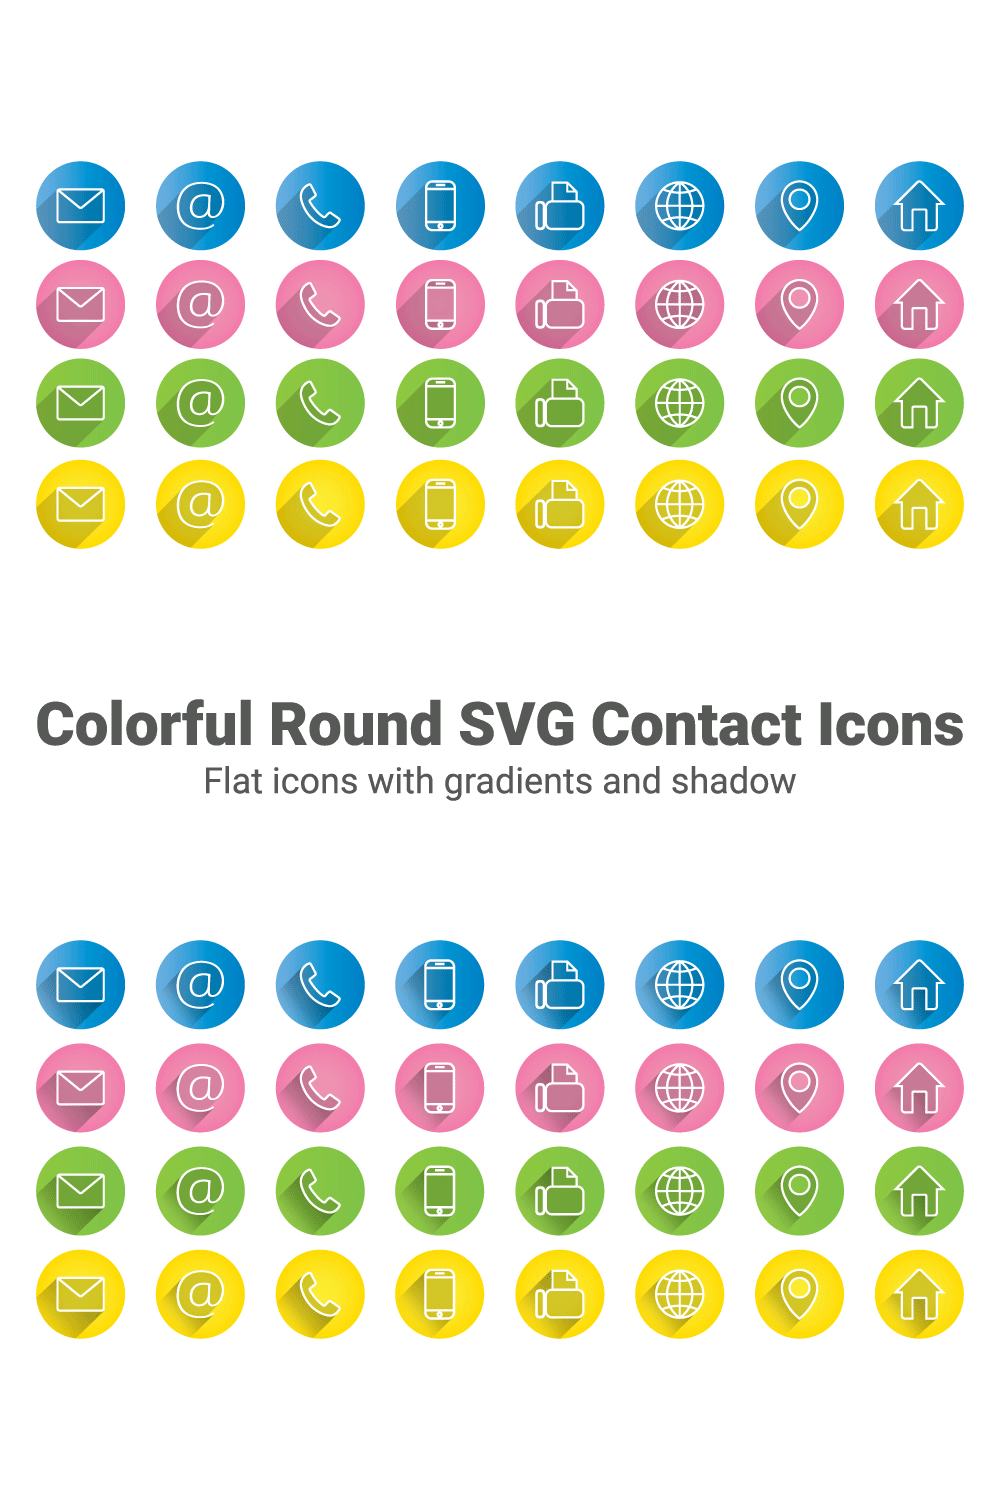 Colorful Round SVG Contact Icons pinterest preview image.